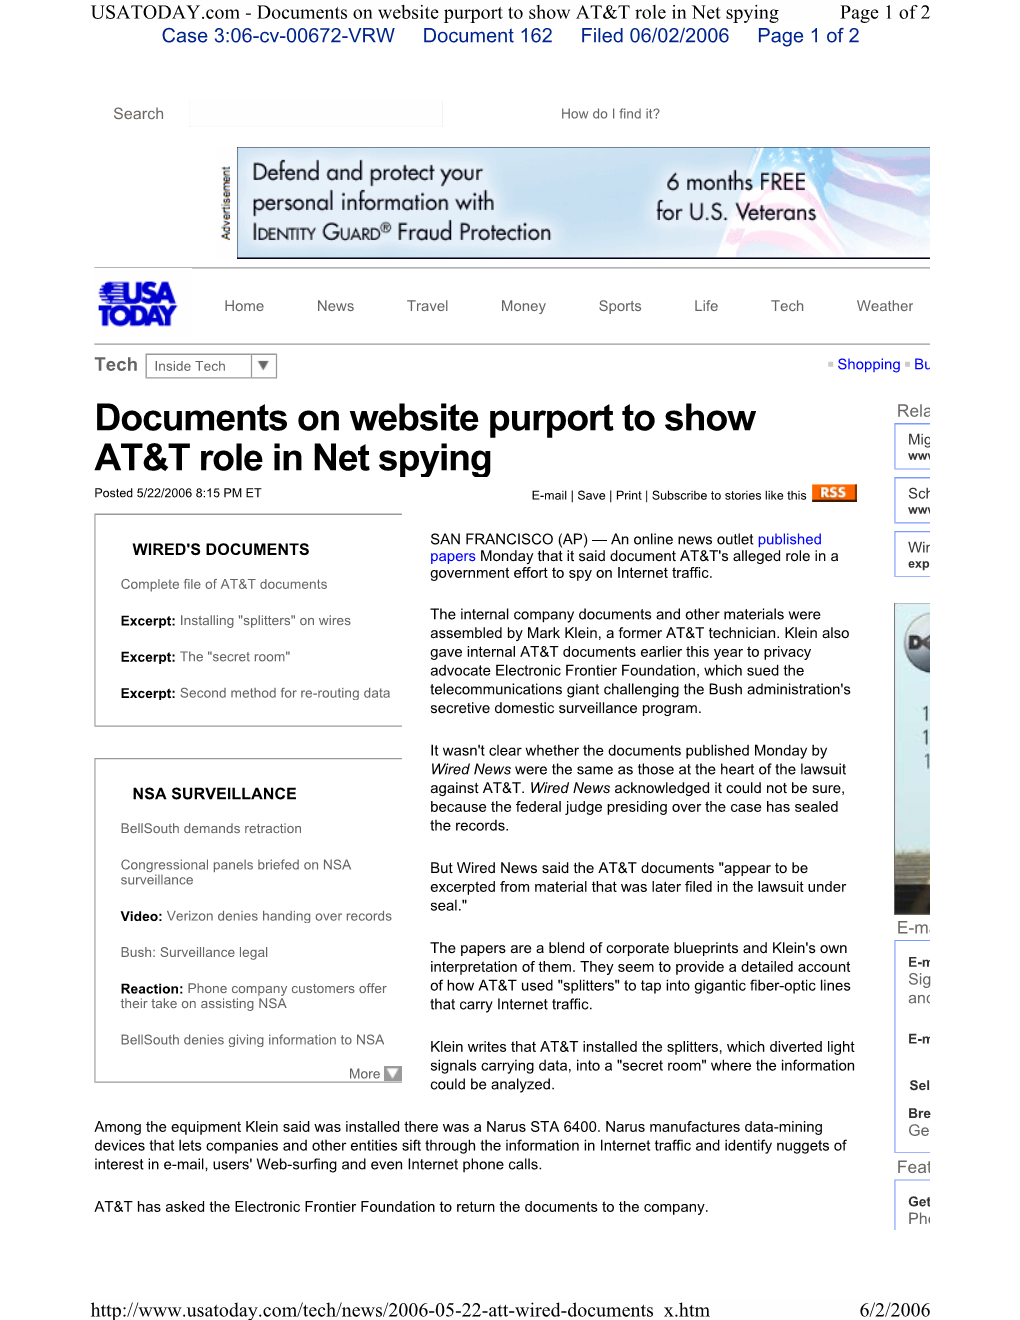 Documents on Website Purport to Show AT&T Role in Net Spying